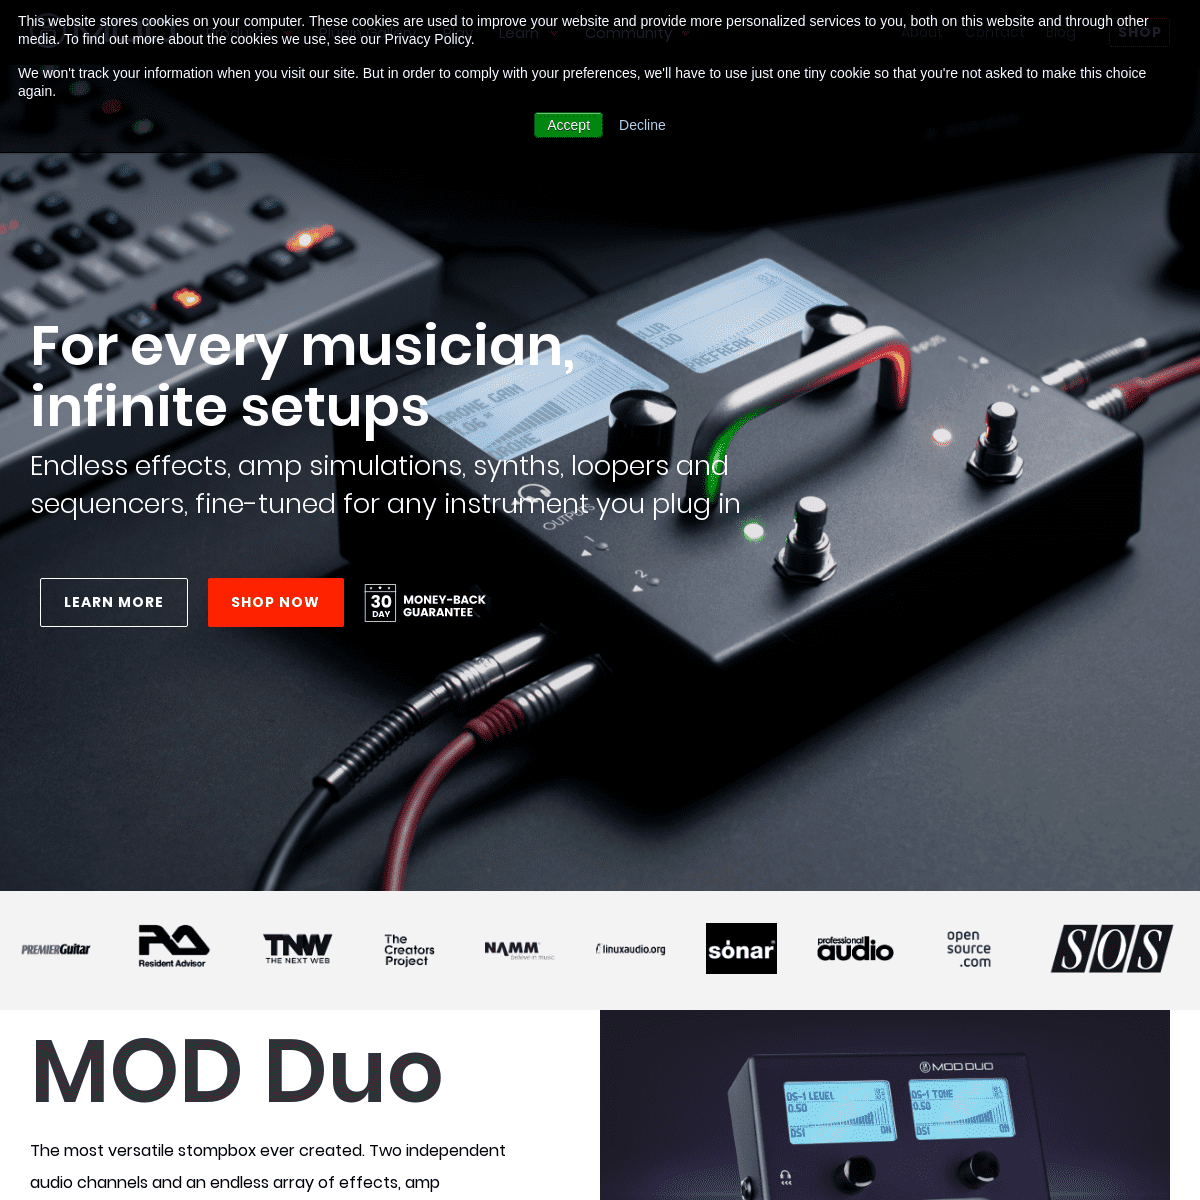 A complete backup of moddevices.com